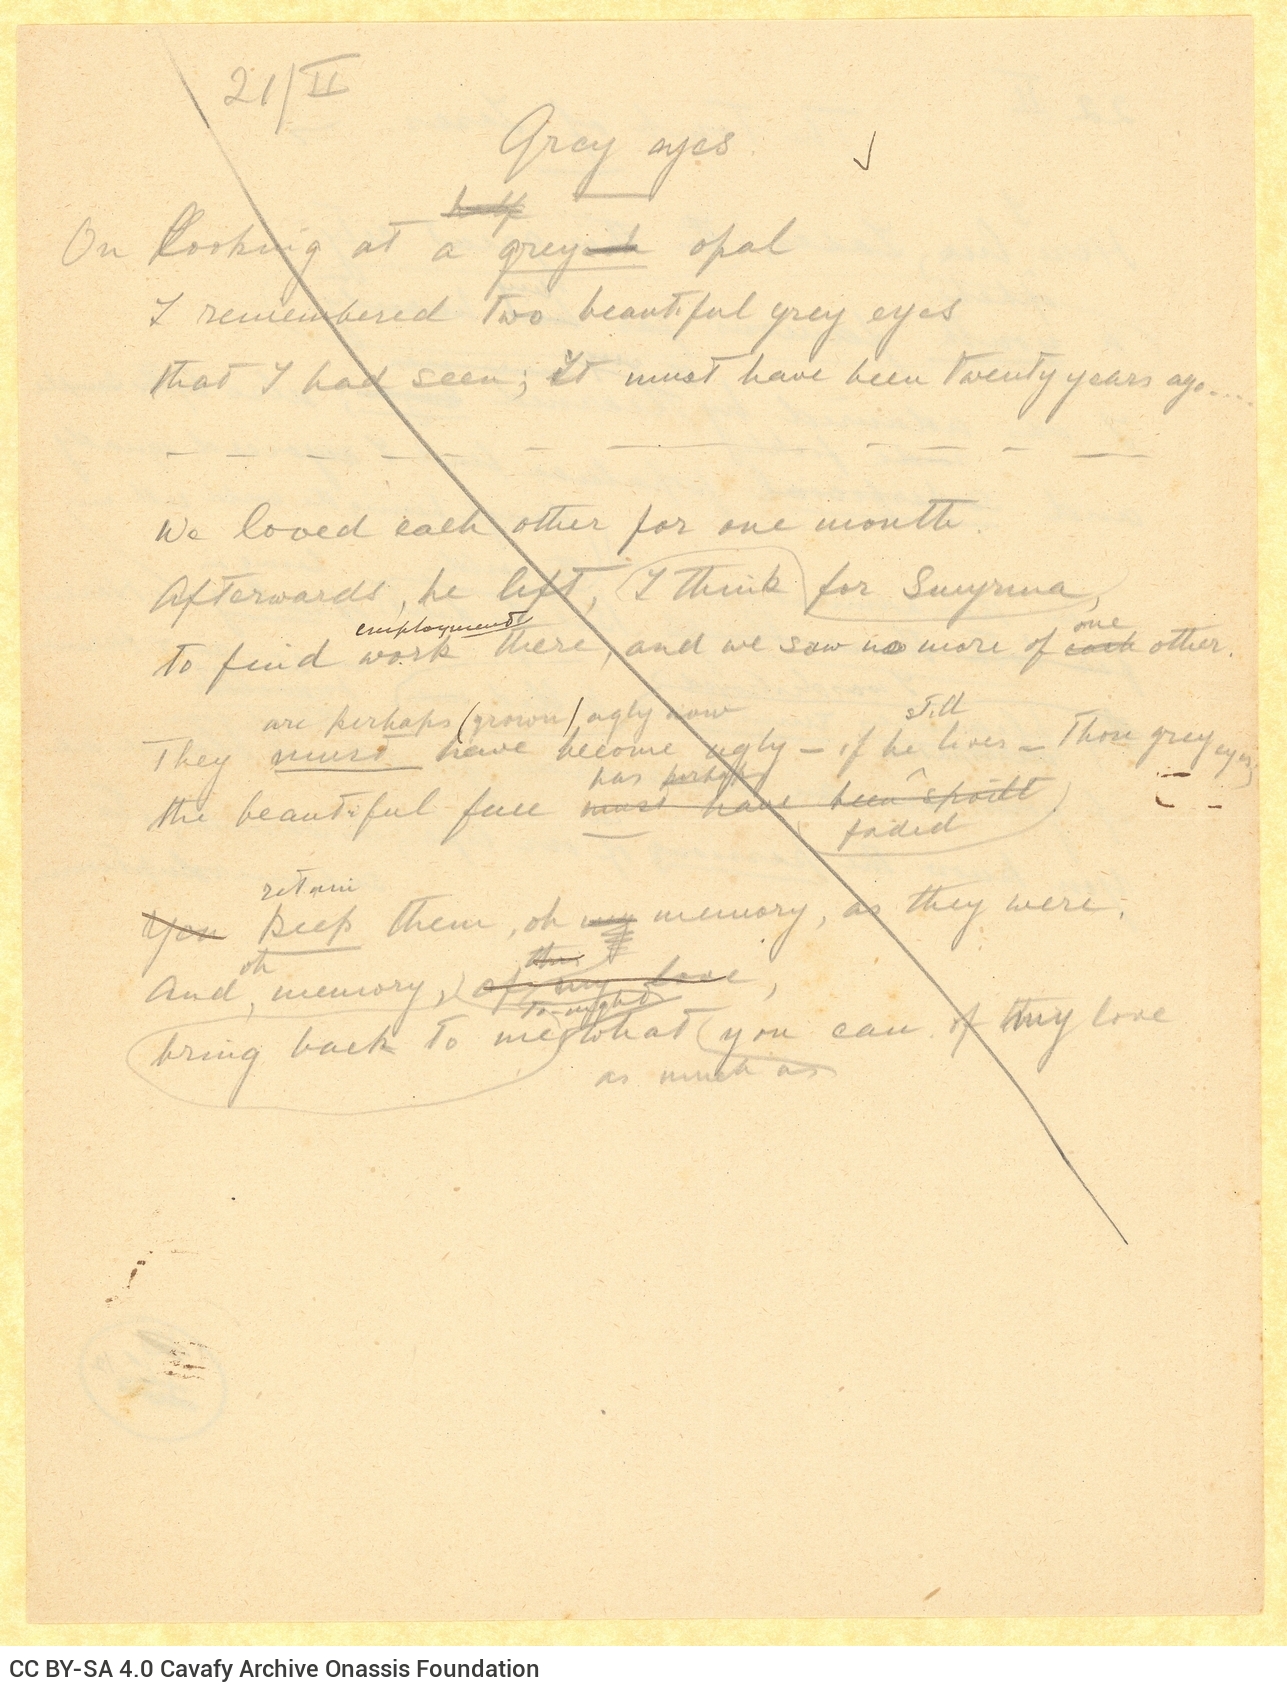 Handwritten translations into English of two of Cavafy's poems by G. A. Valassopoulo on both sides of a sheet. The crossed